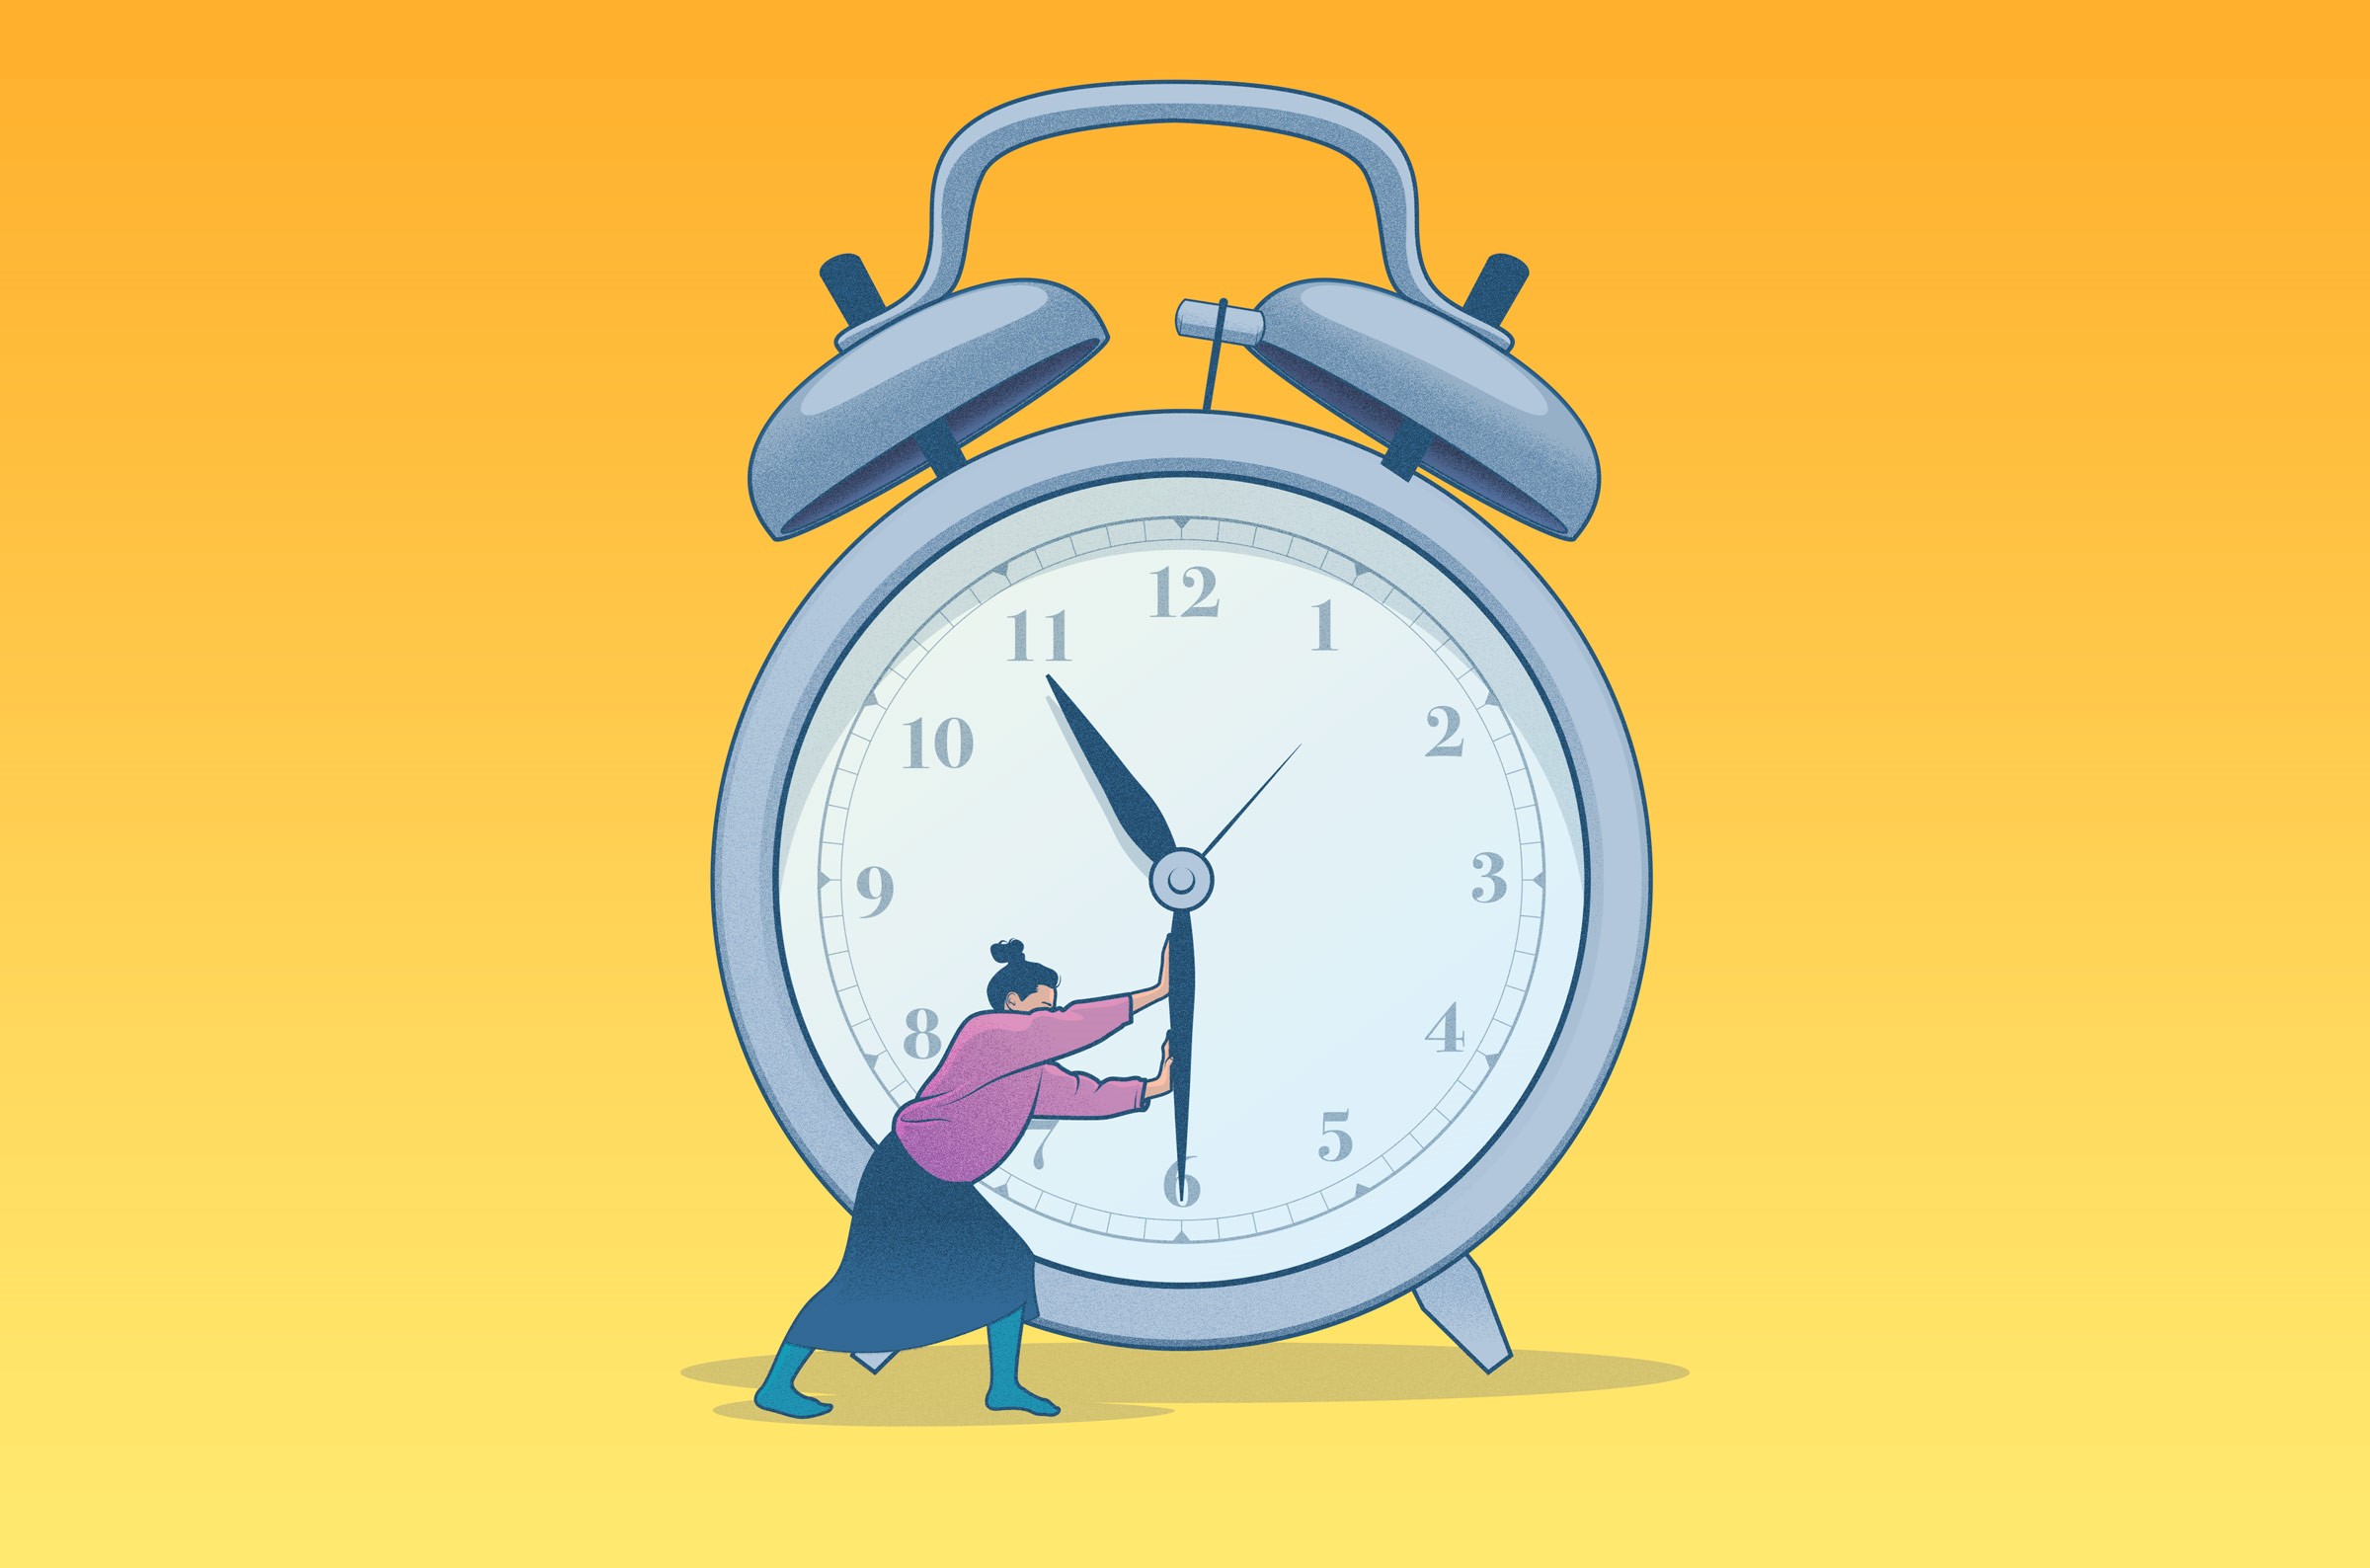 Daylight Saving Time is ending: here's a plan to help you adjust